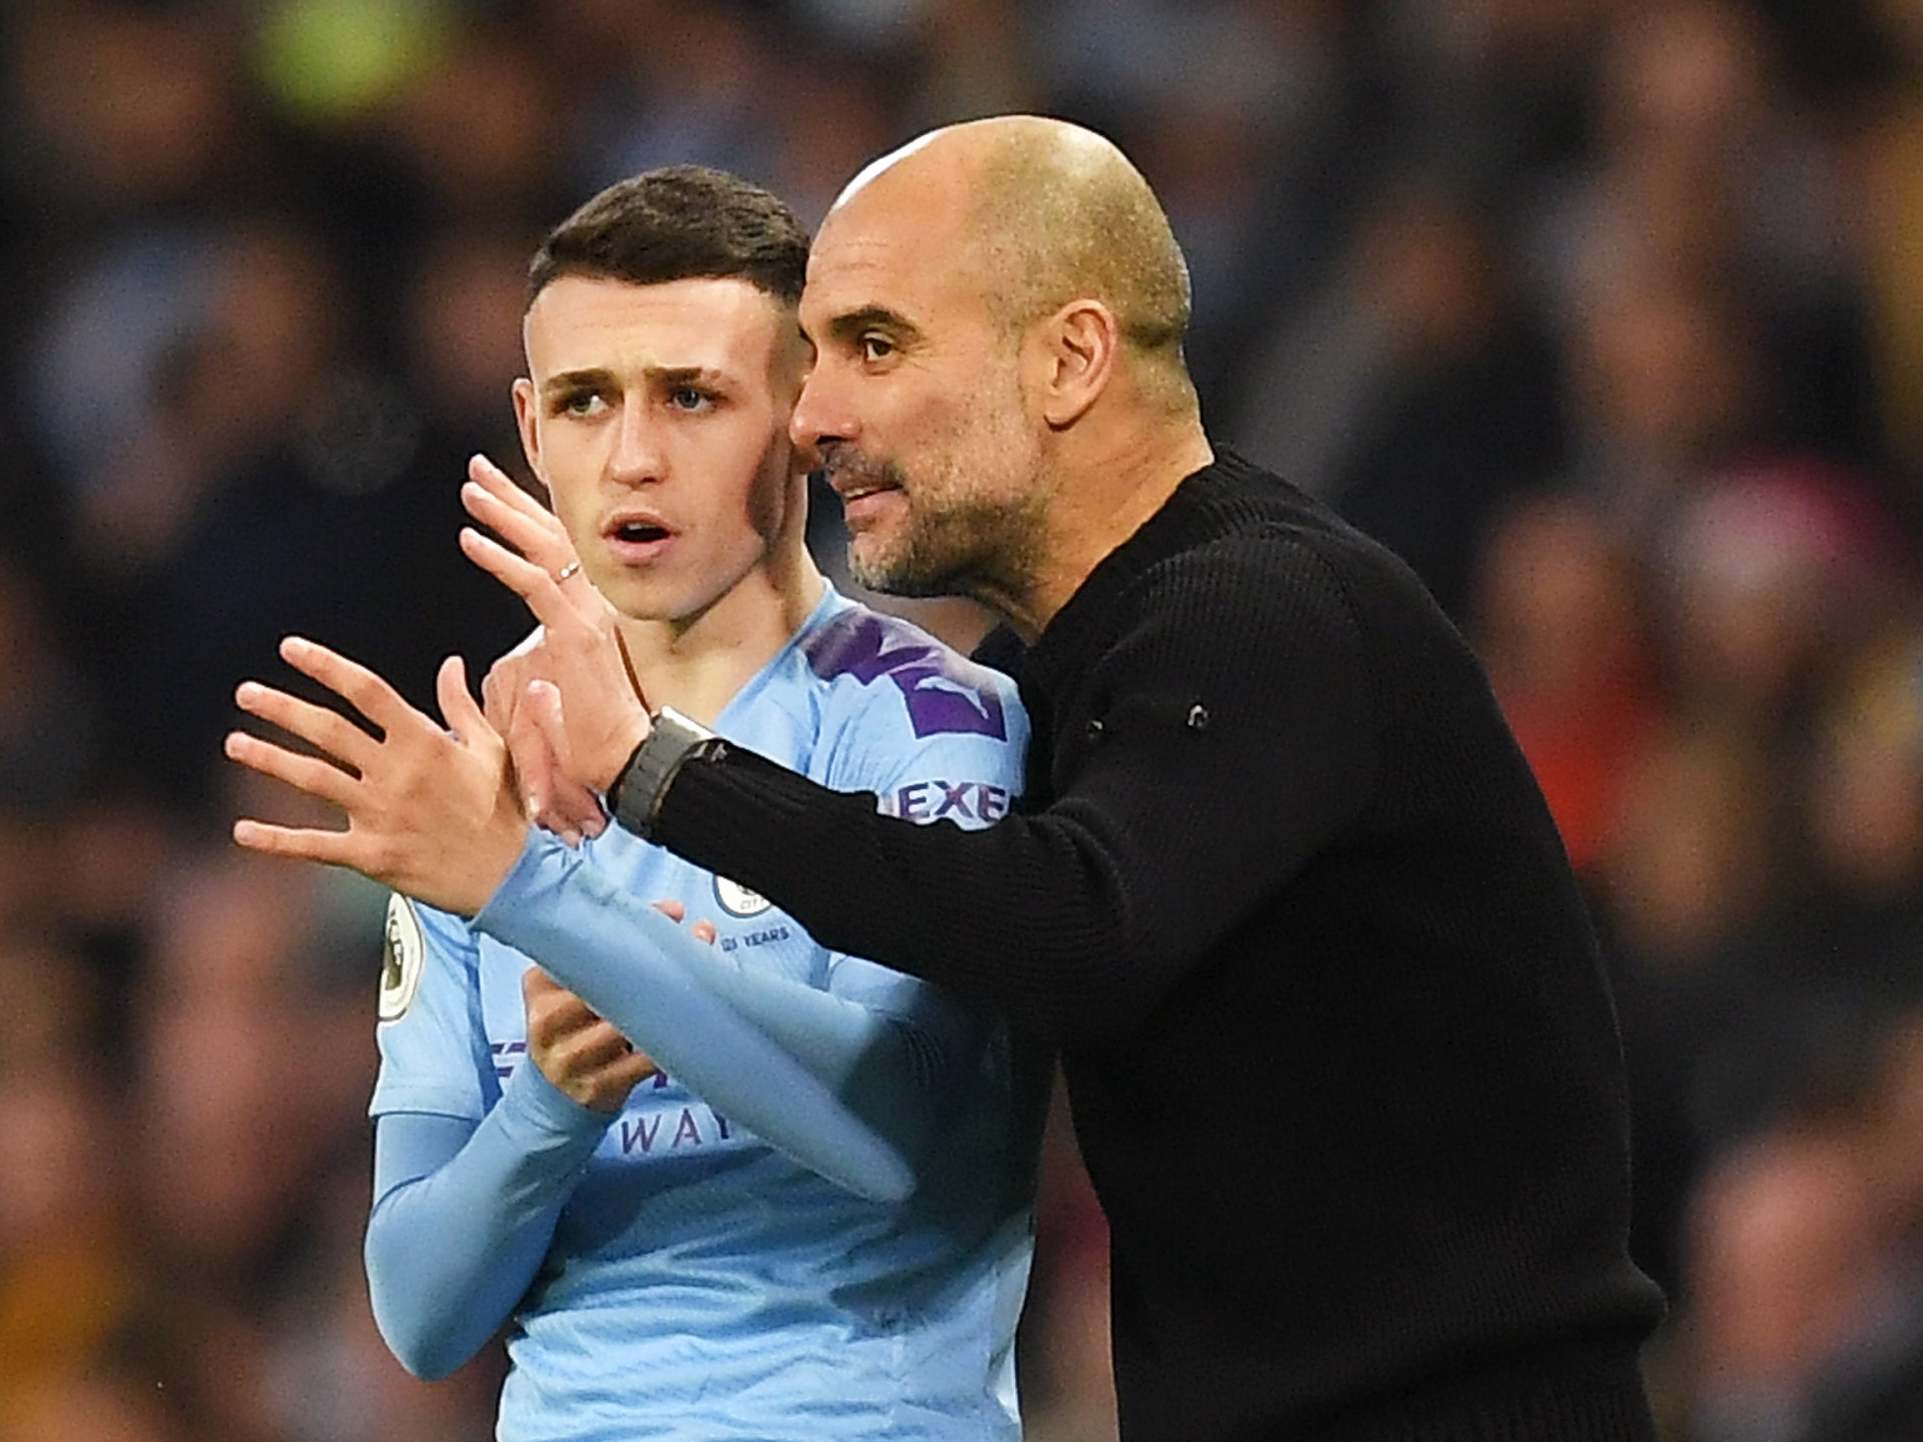 Pep Guardiola has used Phil Foden sparingly this season